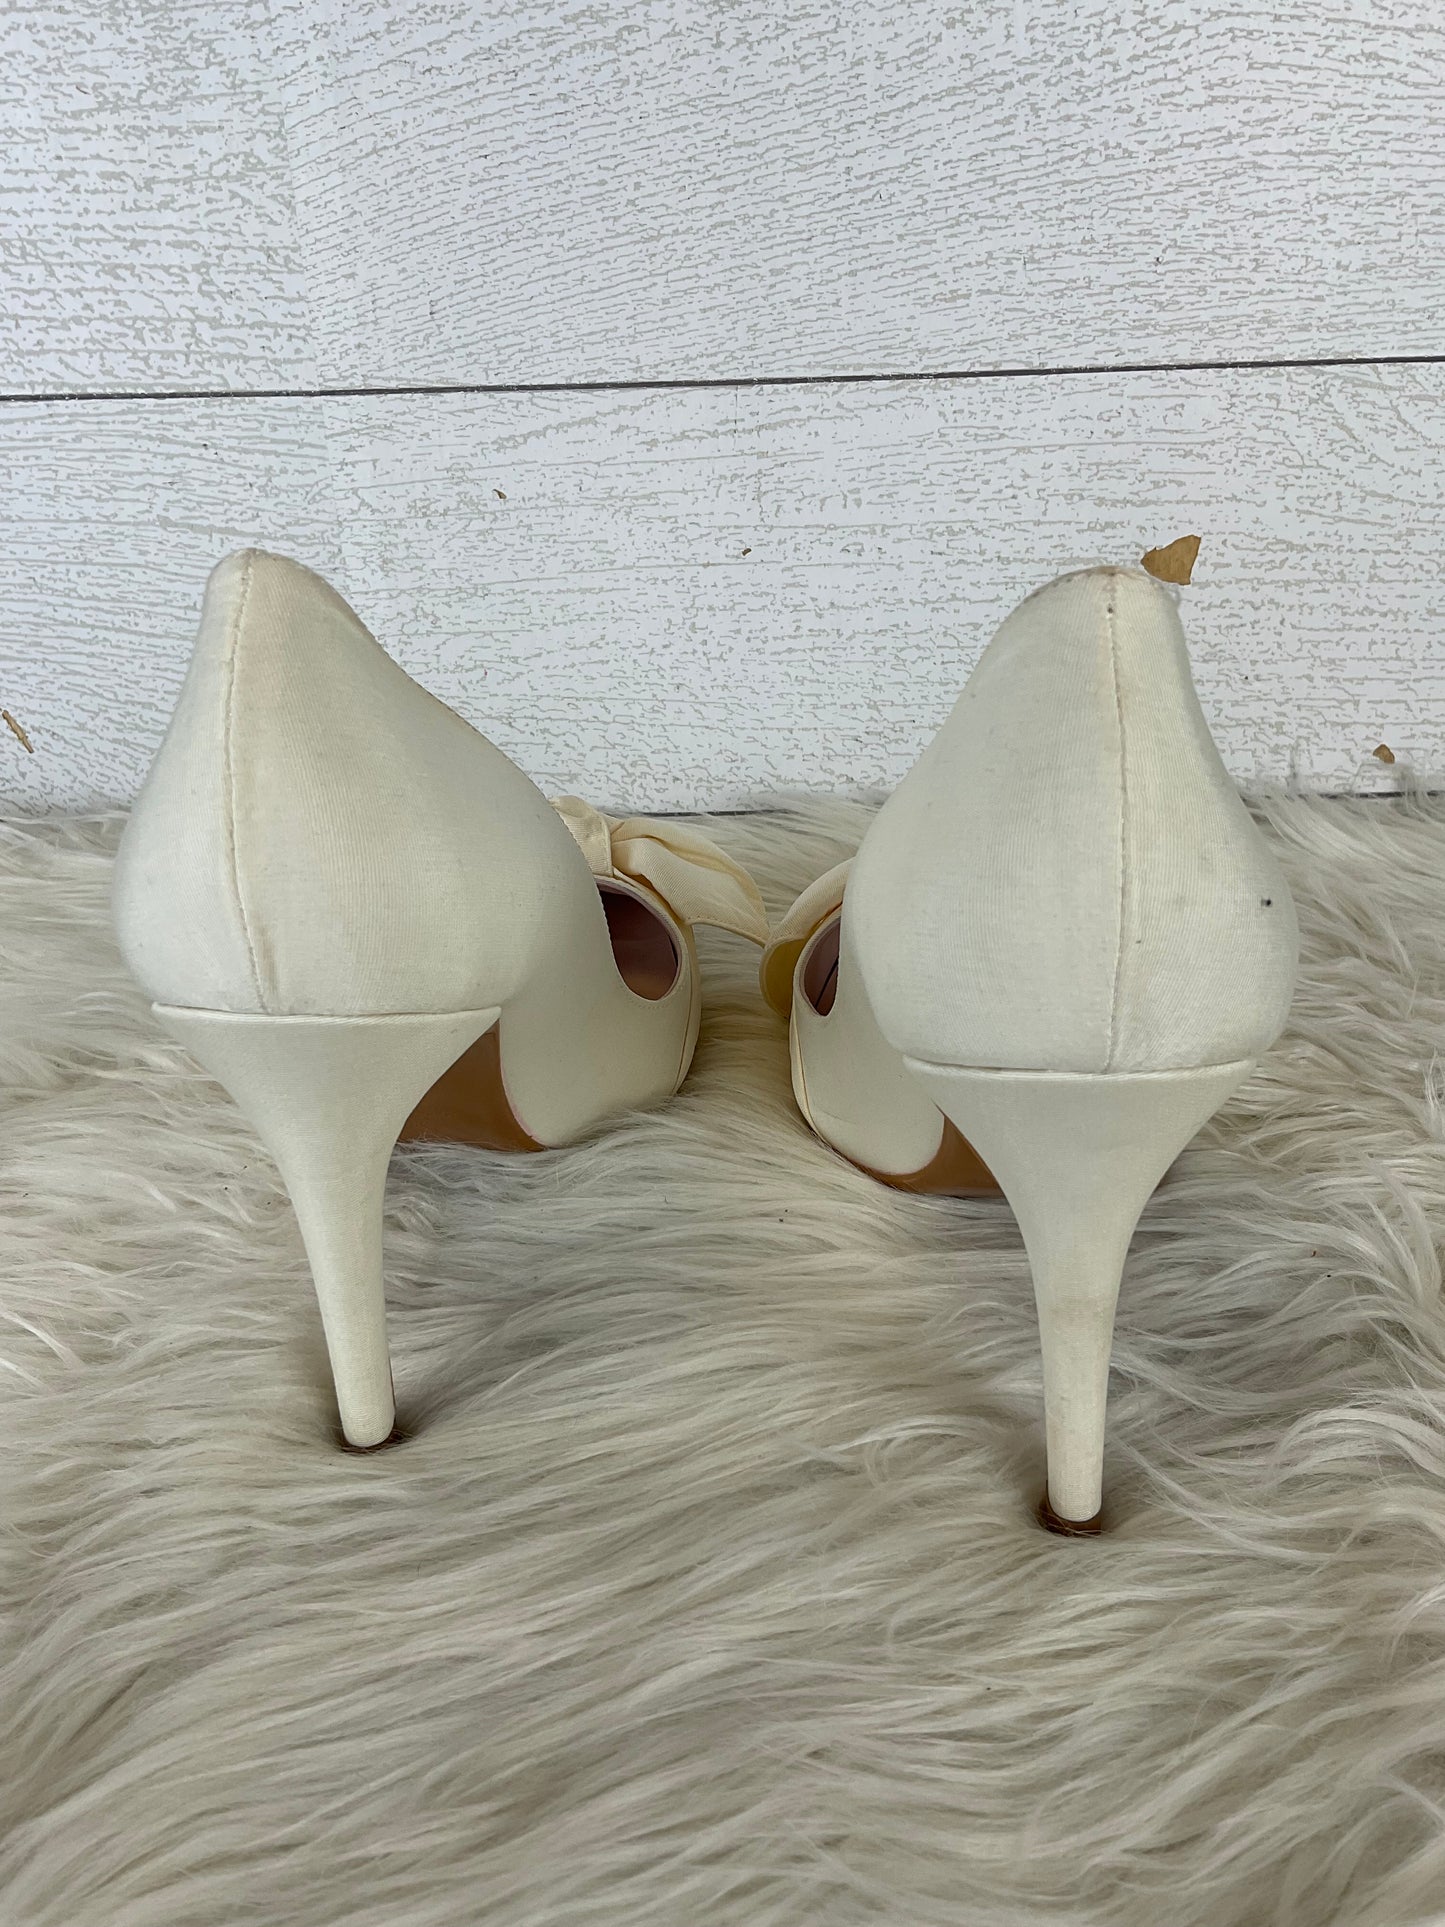 Shoes Heels Stiletto By Ted Baker  Size: 8